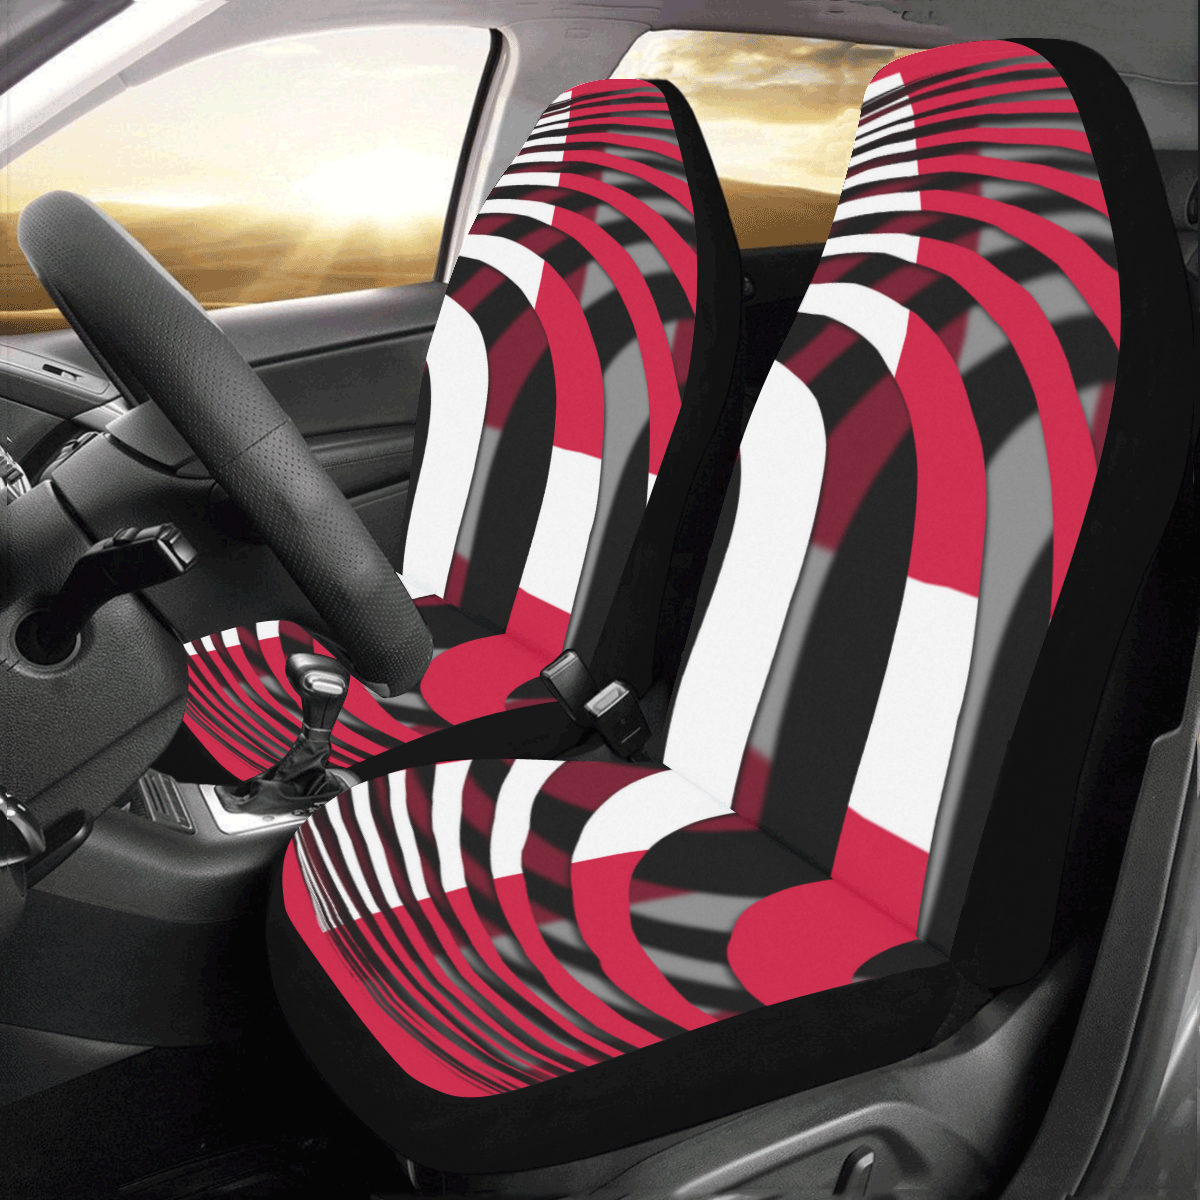 The Flag of Denmark Car Seat Covers (Set of 2)